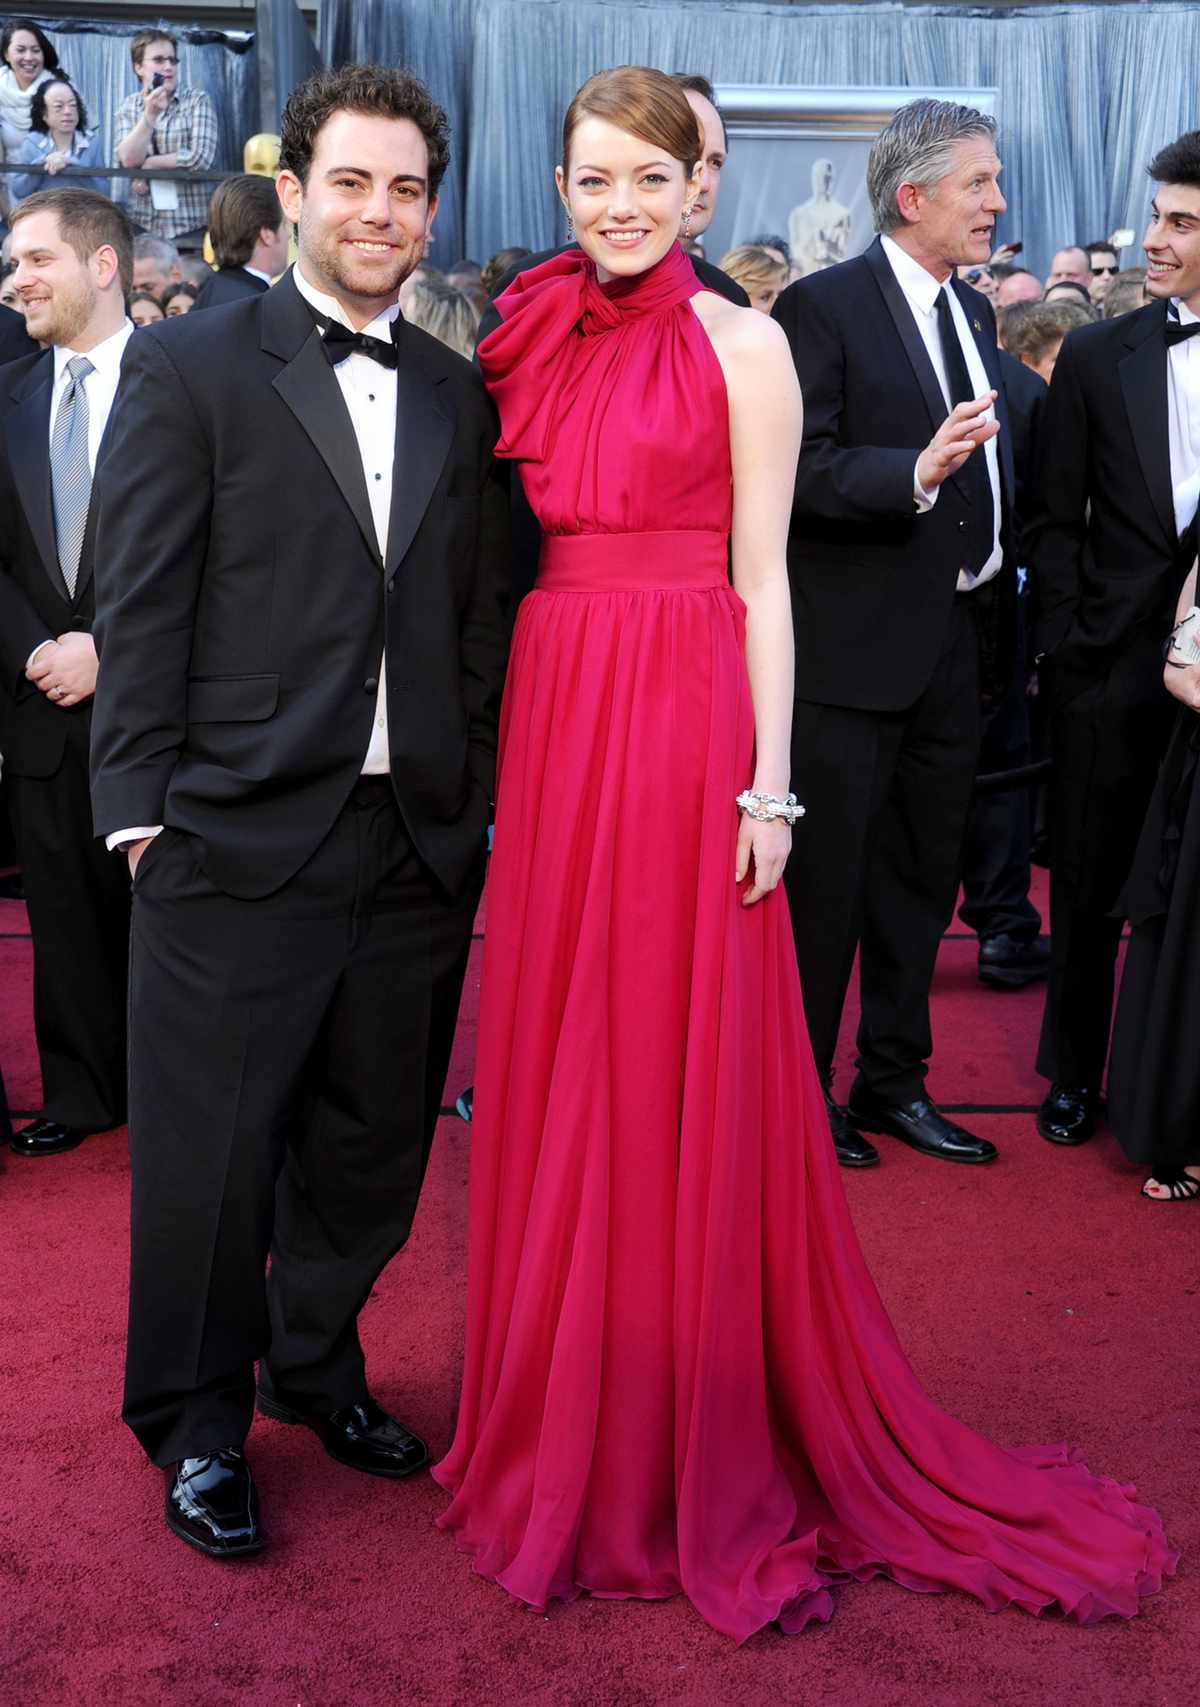 Actress Emma Stone (R) and brother Spencer Stone arrive at the 84th Annual Academy Awards at Hollywood & Highland Center on February 26, 2012 in Hollywood, California.